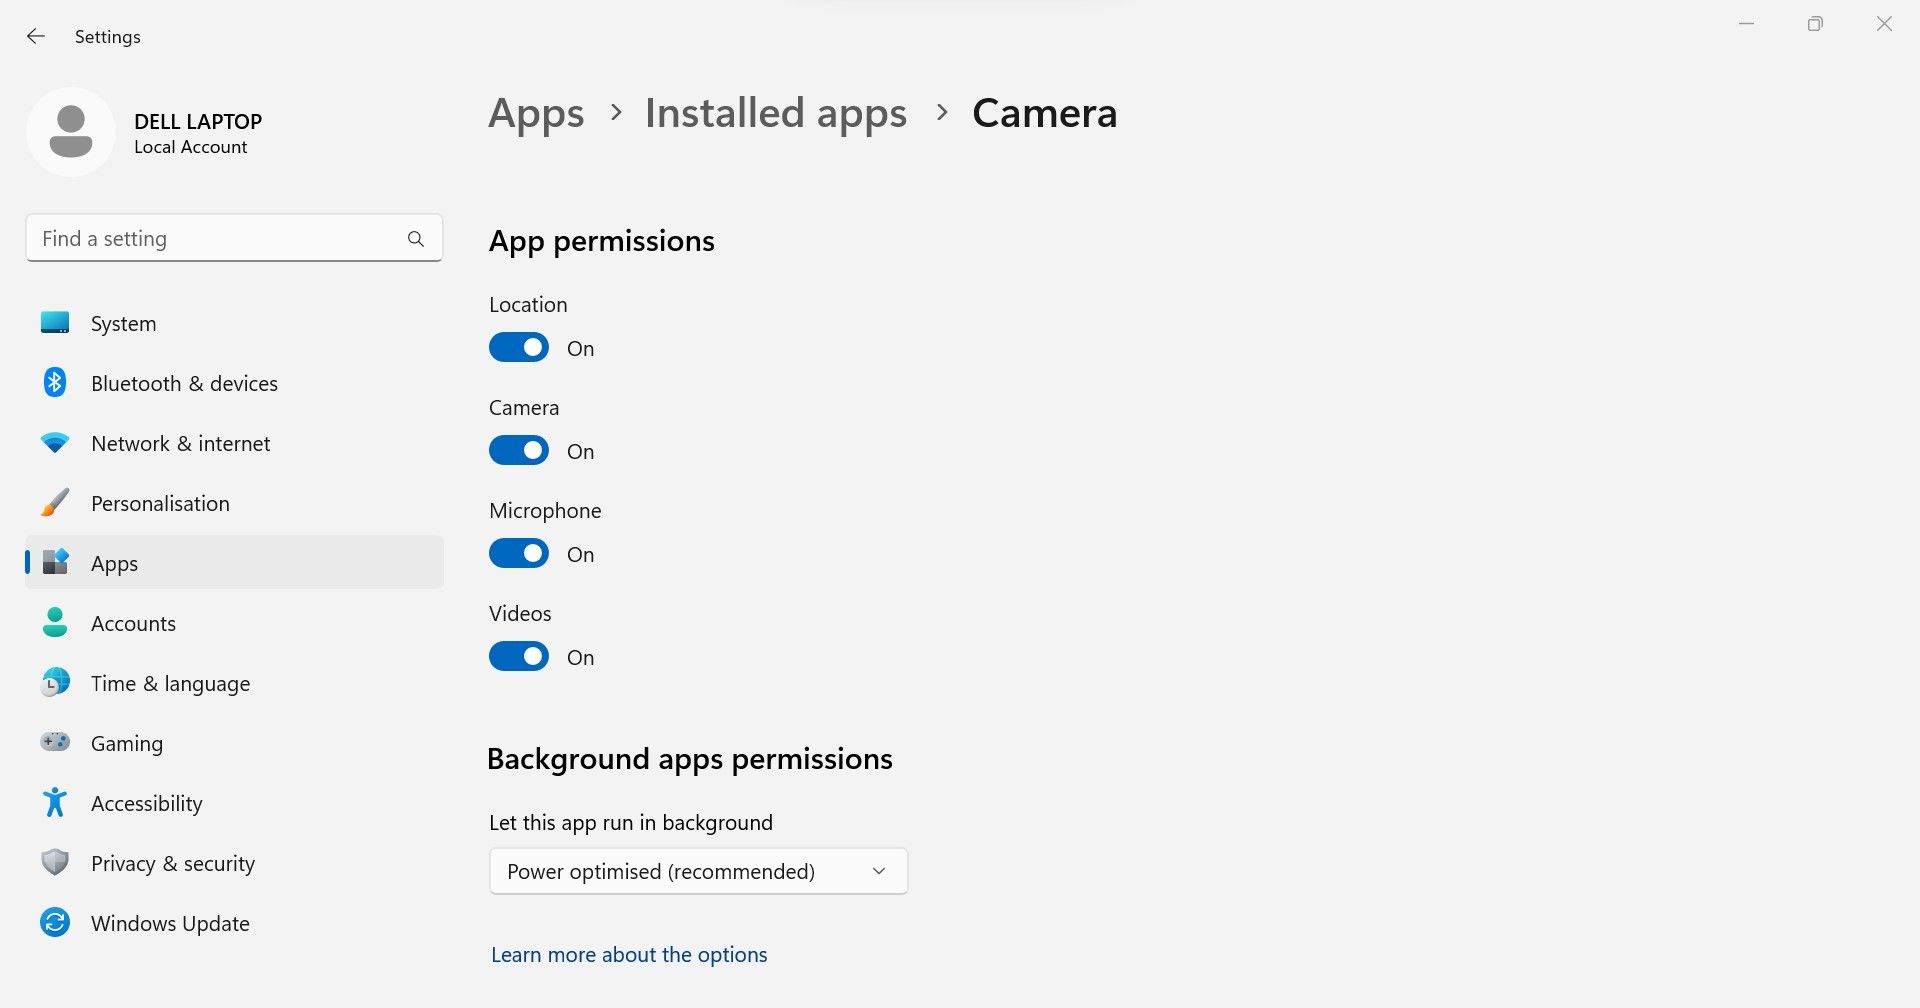 Ensuring the Camera Access is Enabled in the Camera App Settings